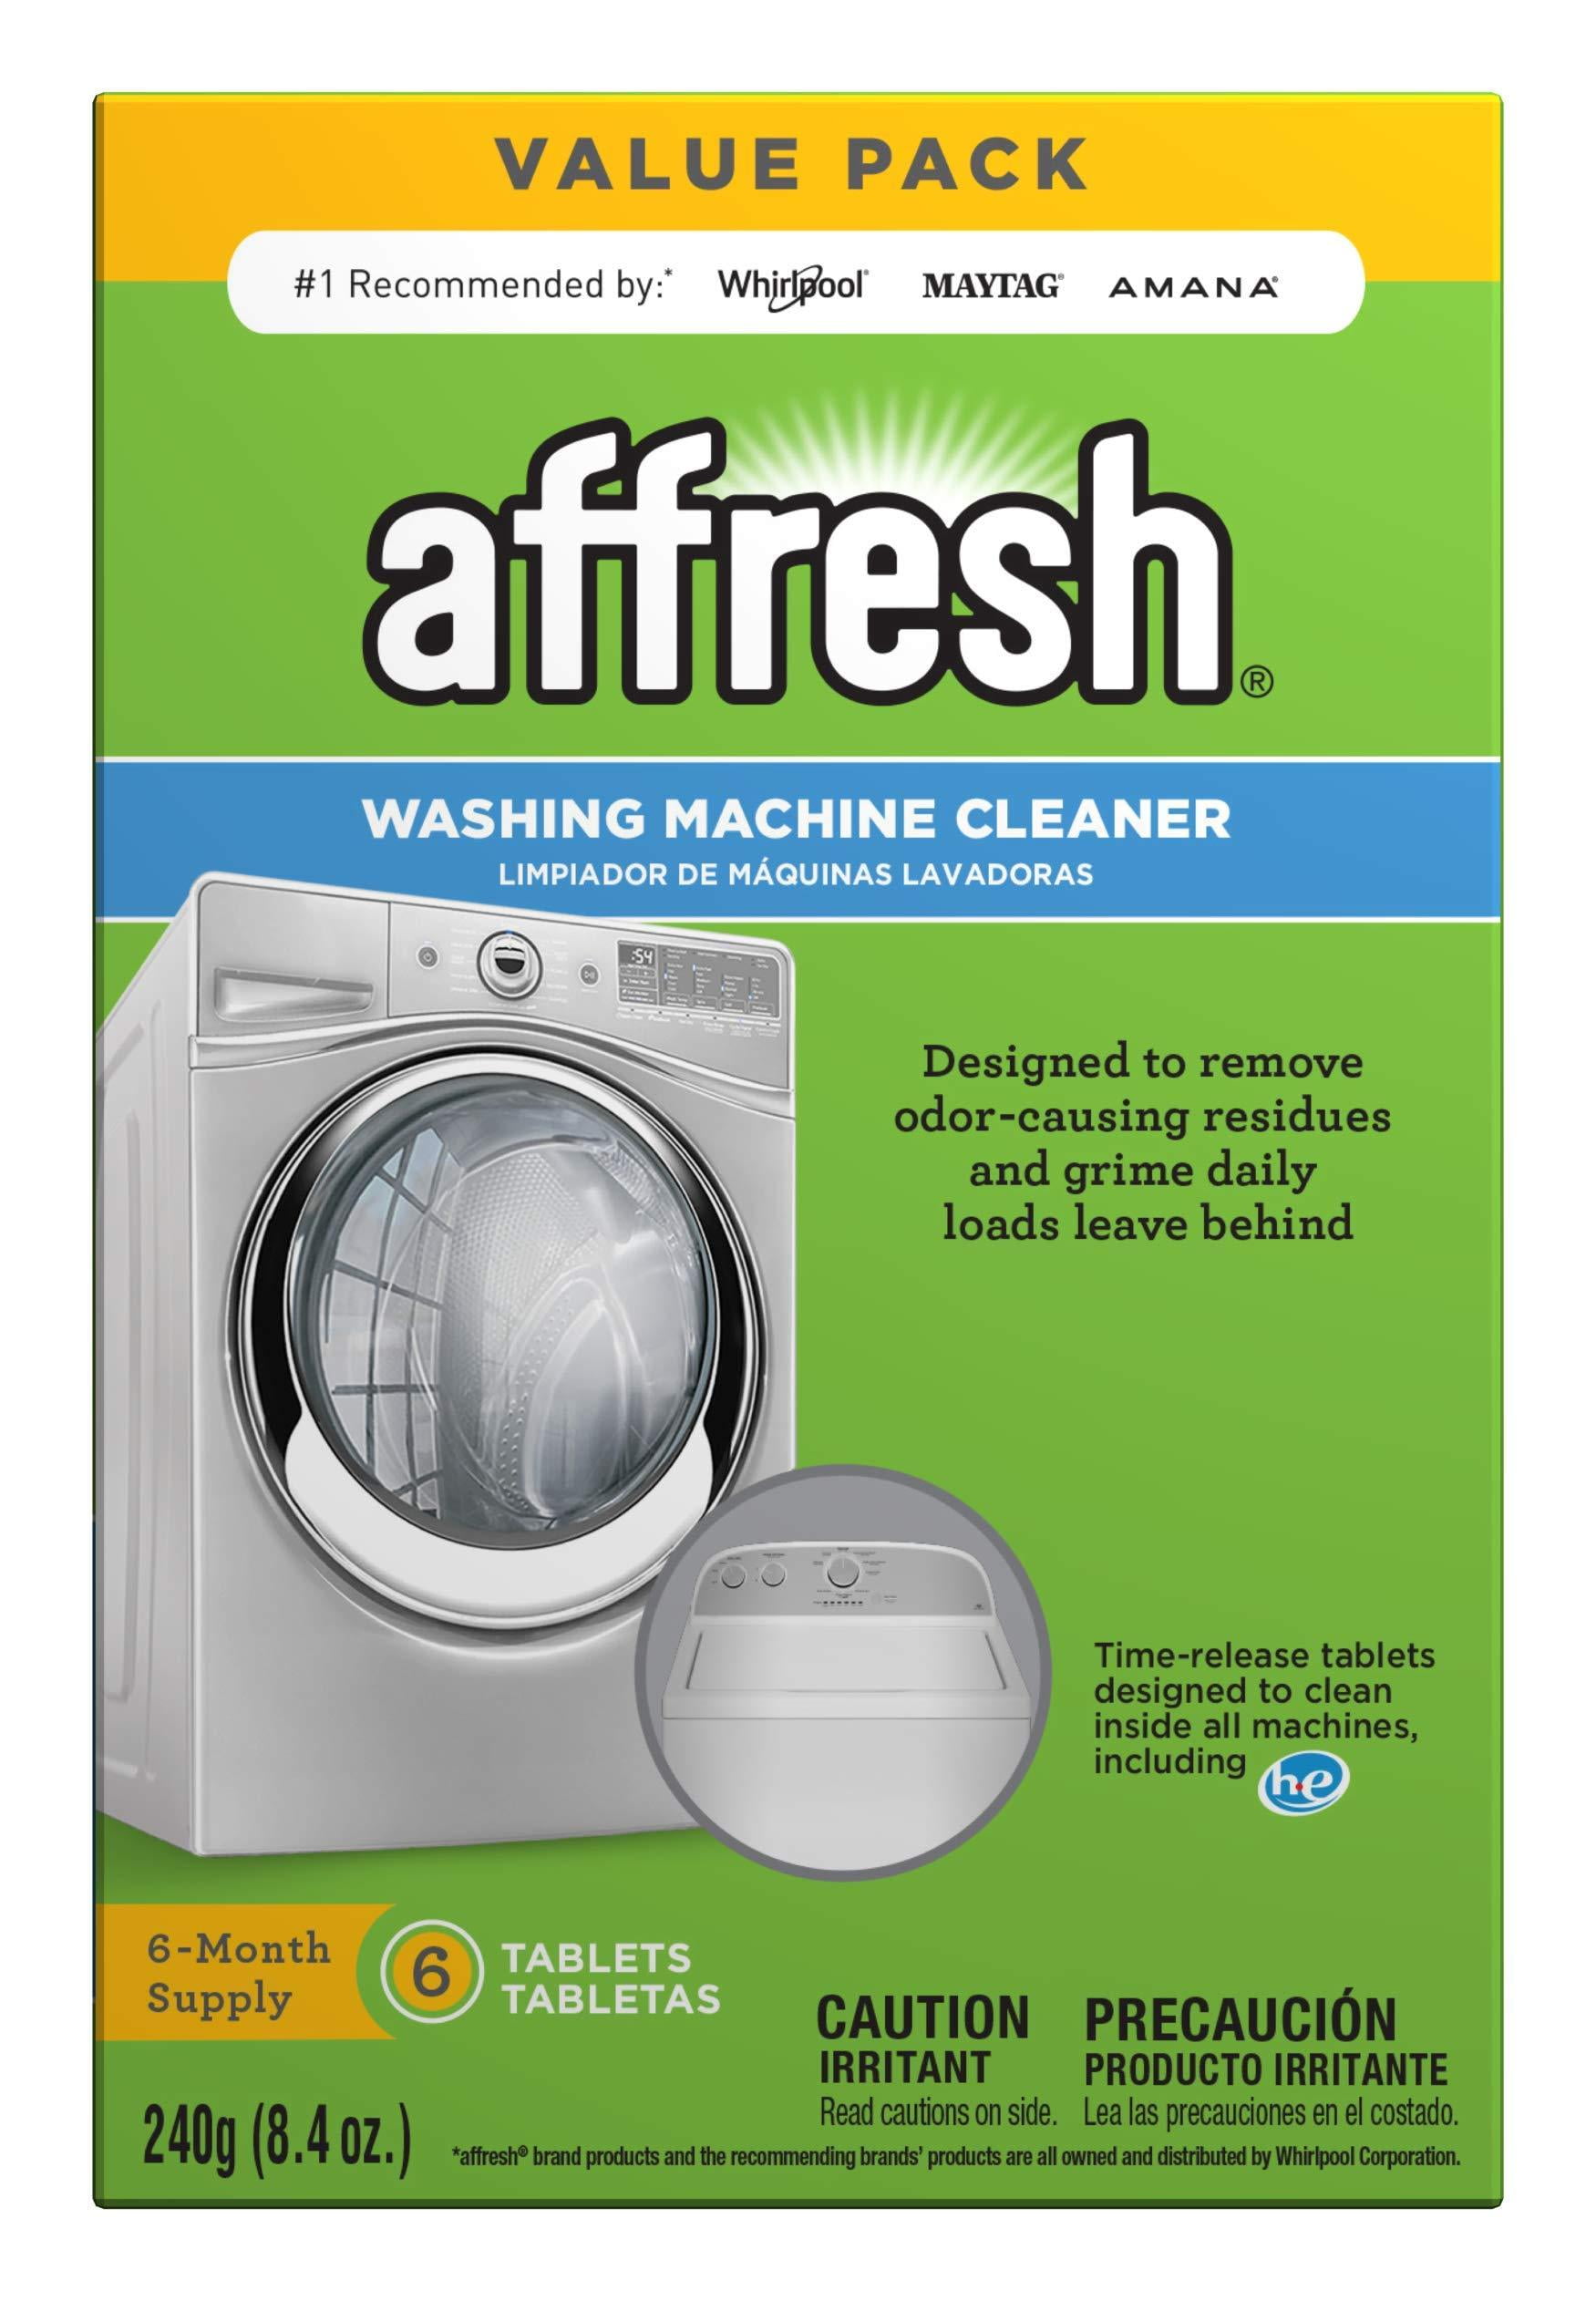  Wash Warrior Washing Machine Cleaner, Washer Machine Cleaner, Washing  Machine Deep Cleaning Tablets, for All Machines Including He, Freshen Your Washing  Machine (1 Packs/ 15Tablets) : Health & Household